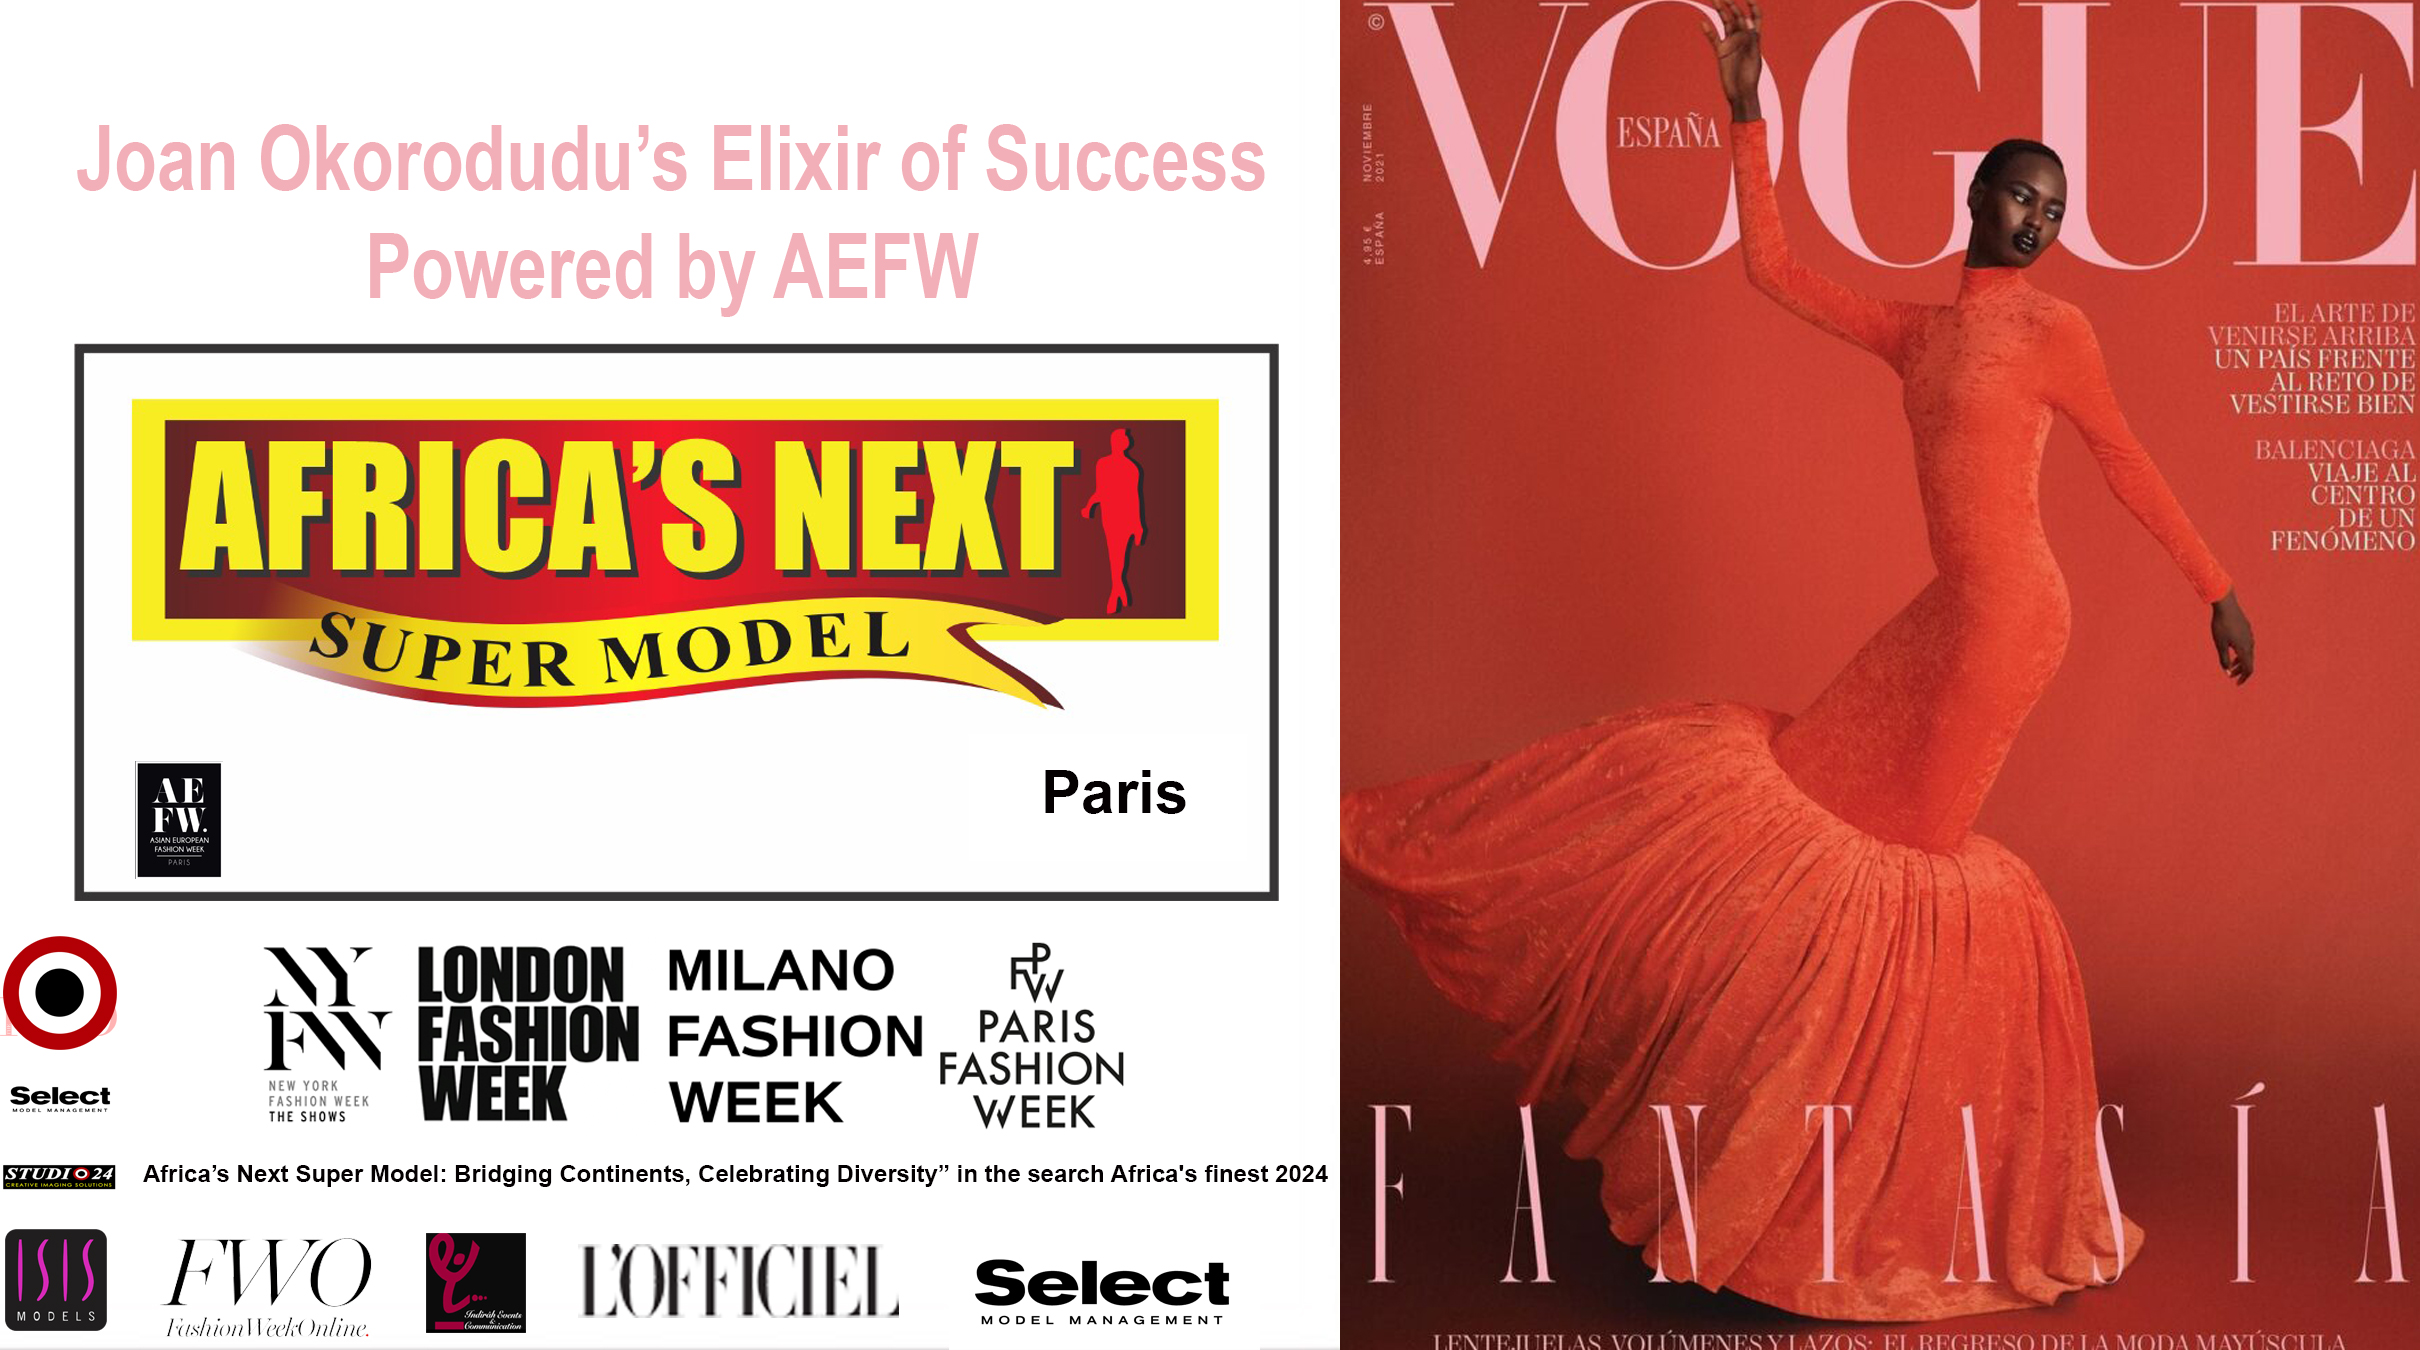 AFRICA-VOGUE-COVER-Africa’s-Next-Super-Model-Bridging-Continents-Celebrating-Diversity-in-the-search Africa's-finest-2024-DN-AFRICA-Media-Partner